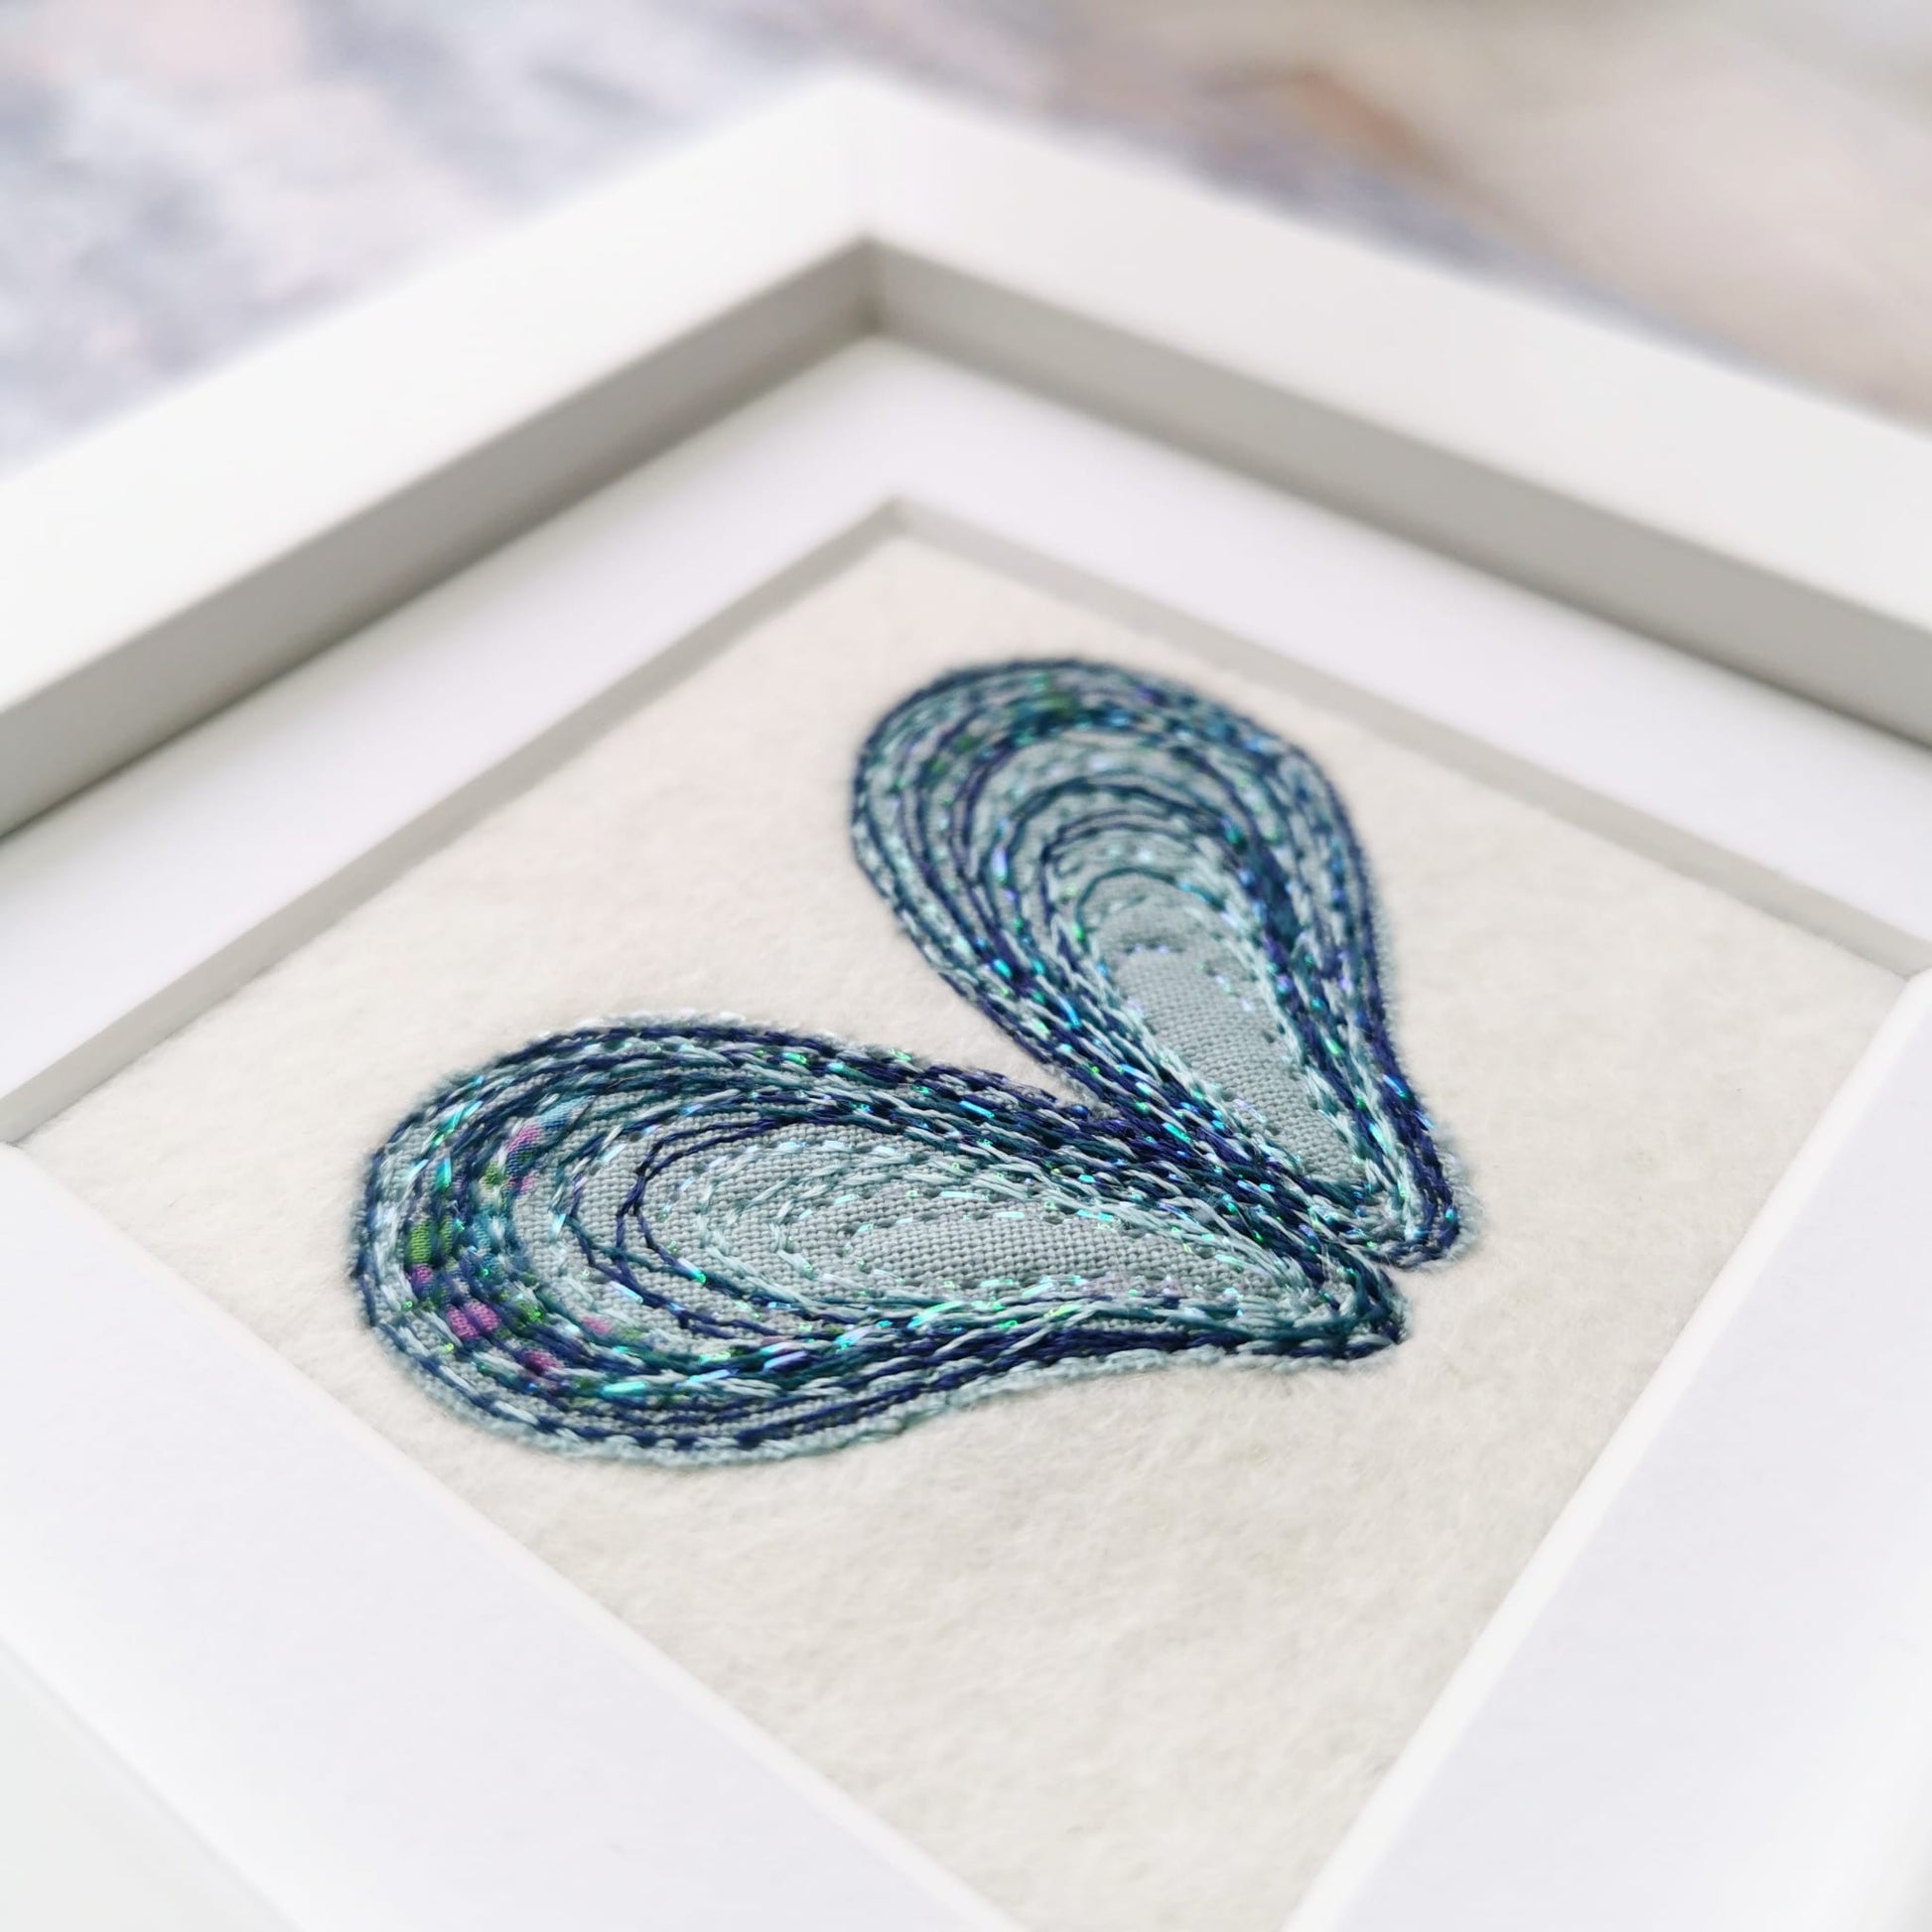 Decoration - Framed Stitched Mussel Heart (Commission)